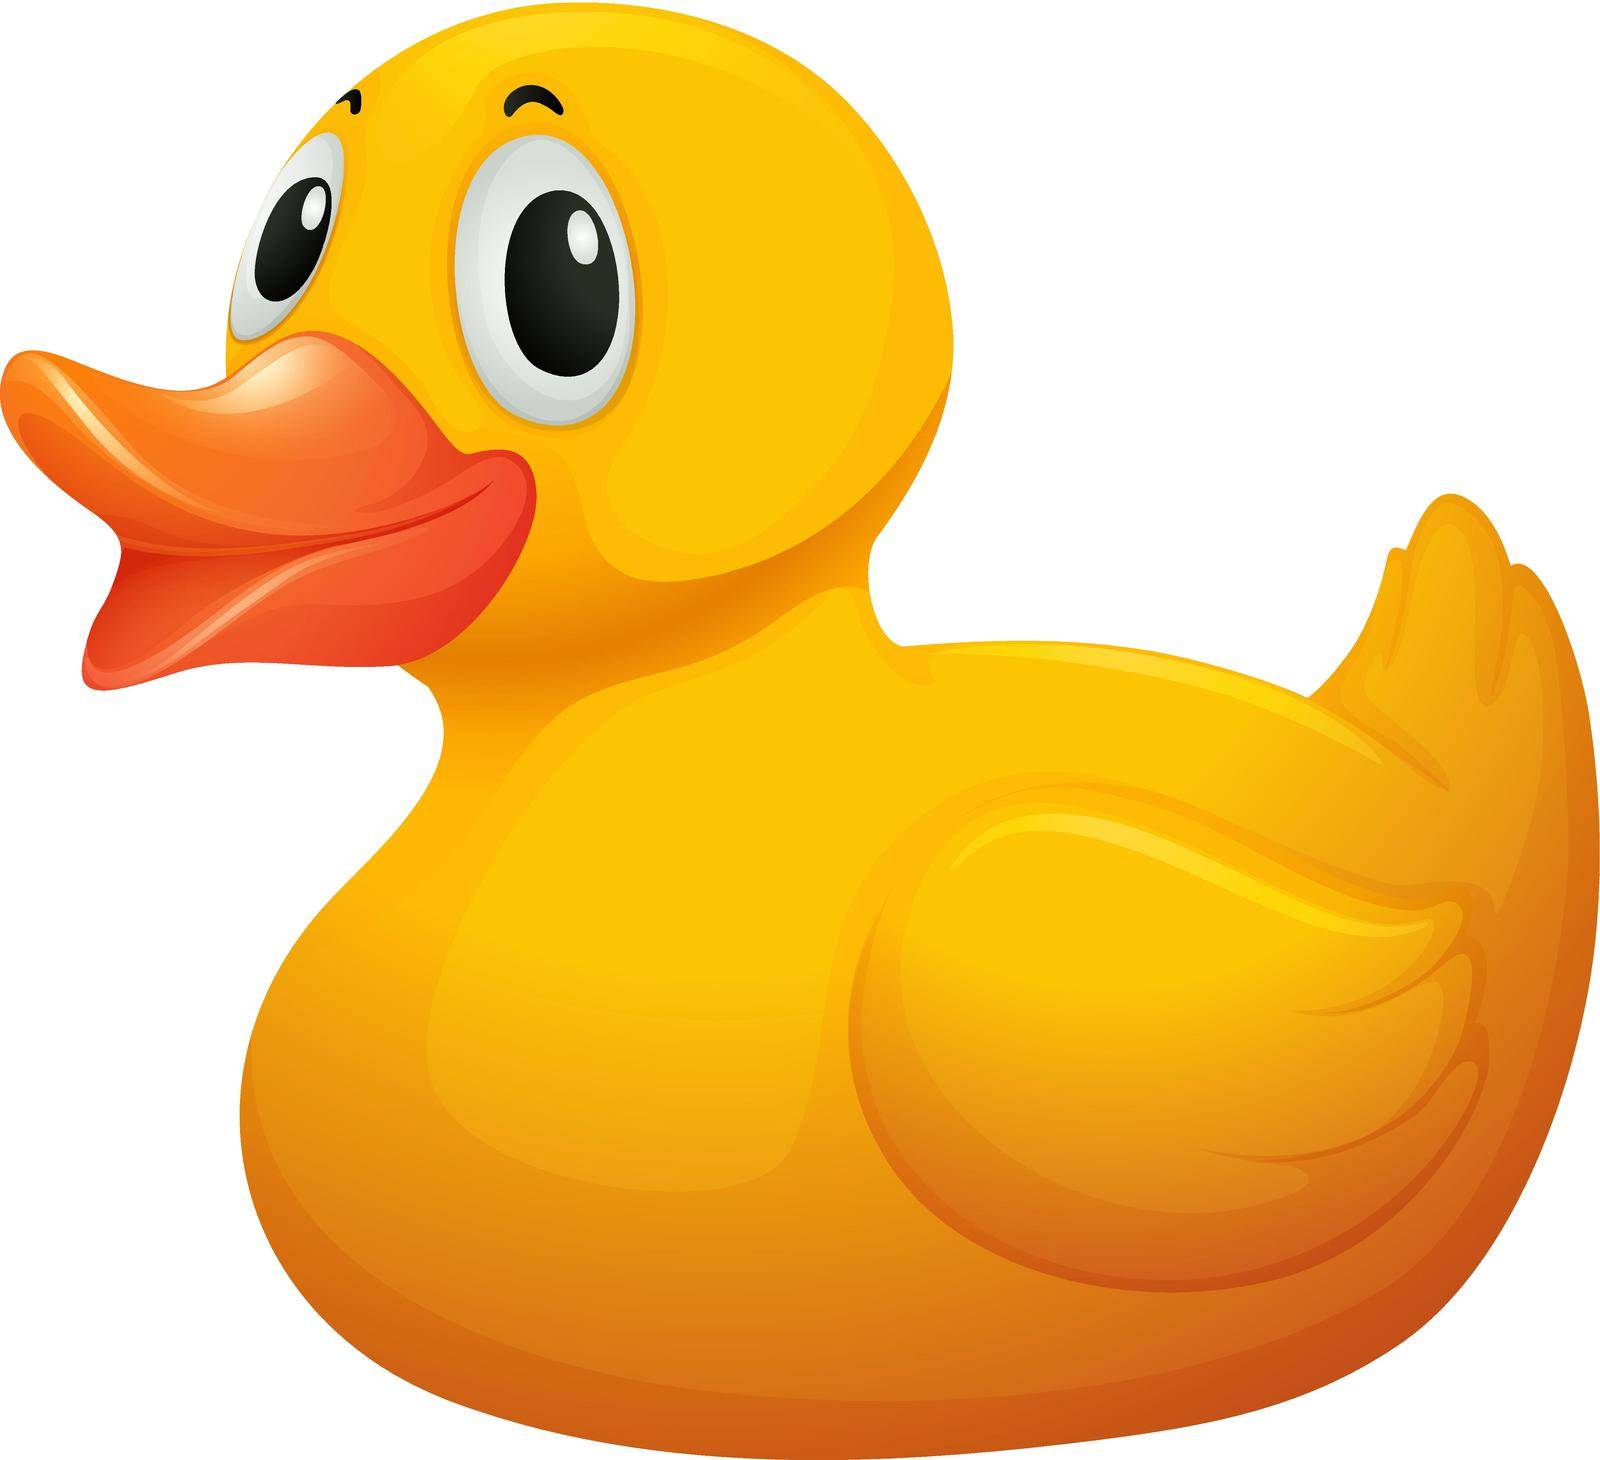 Illustration of a cute yellow rubber duck on a white background